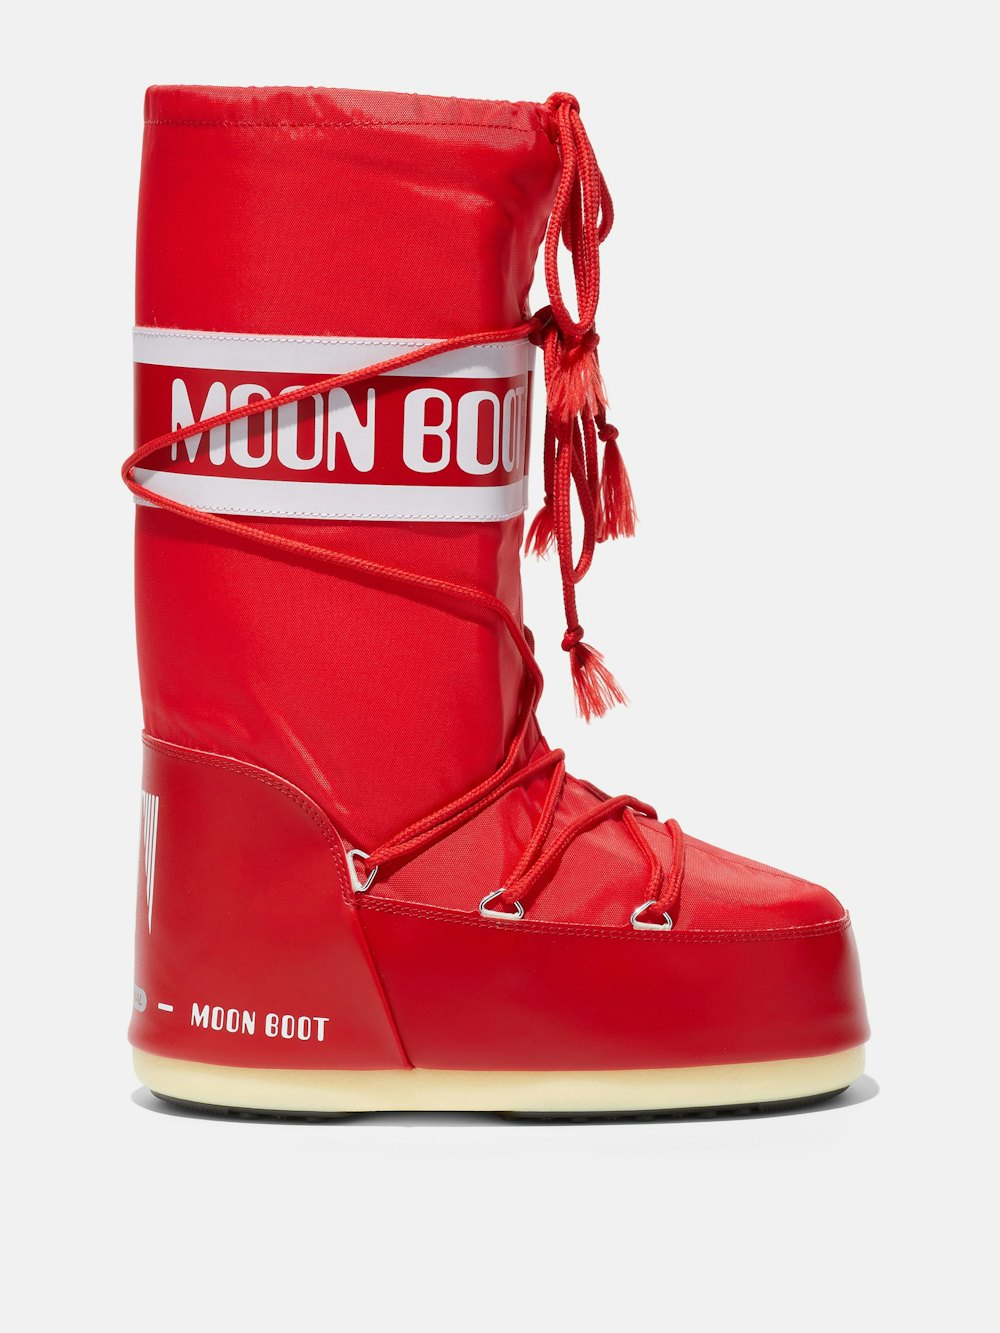 The revival of Moon Boots: how to wear them in real life